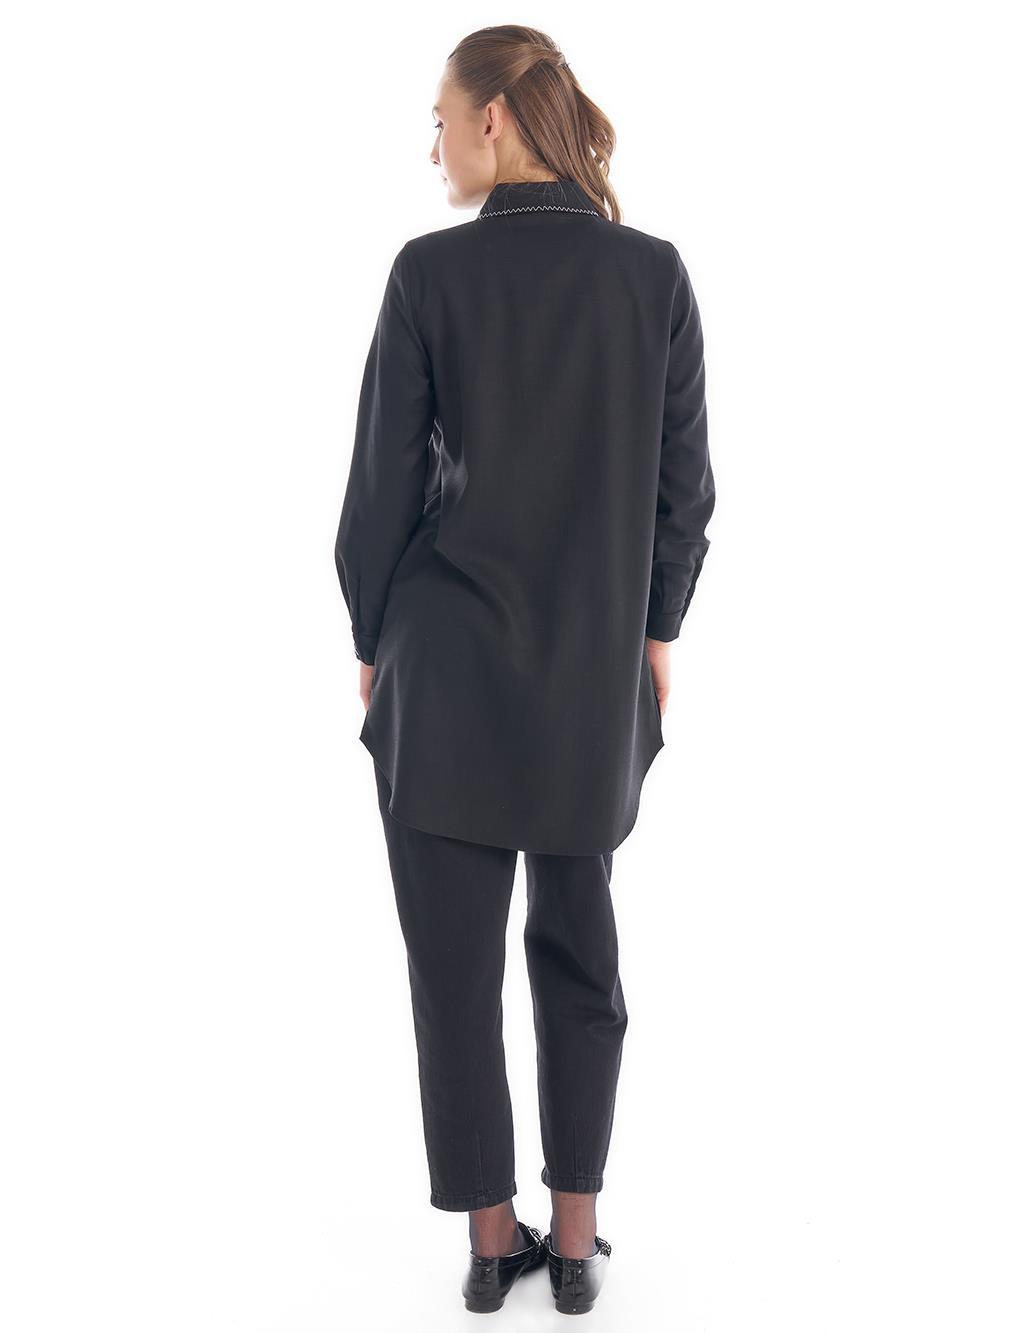 Shirt Collar Tunic with Knit Stitching in Black